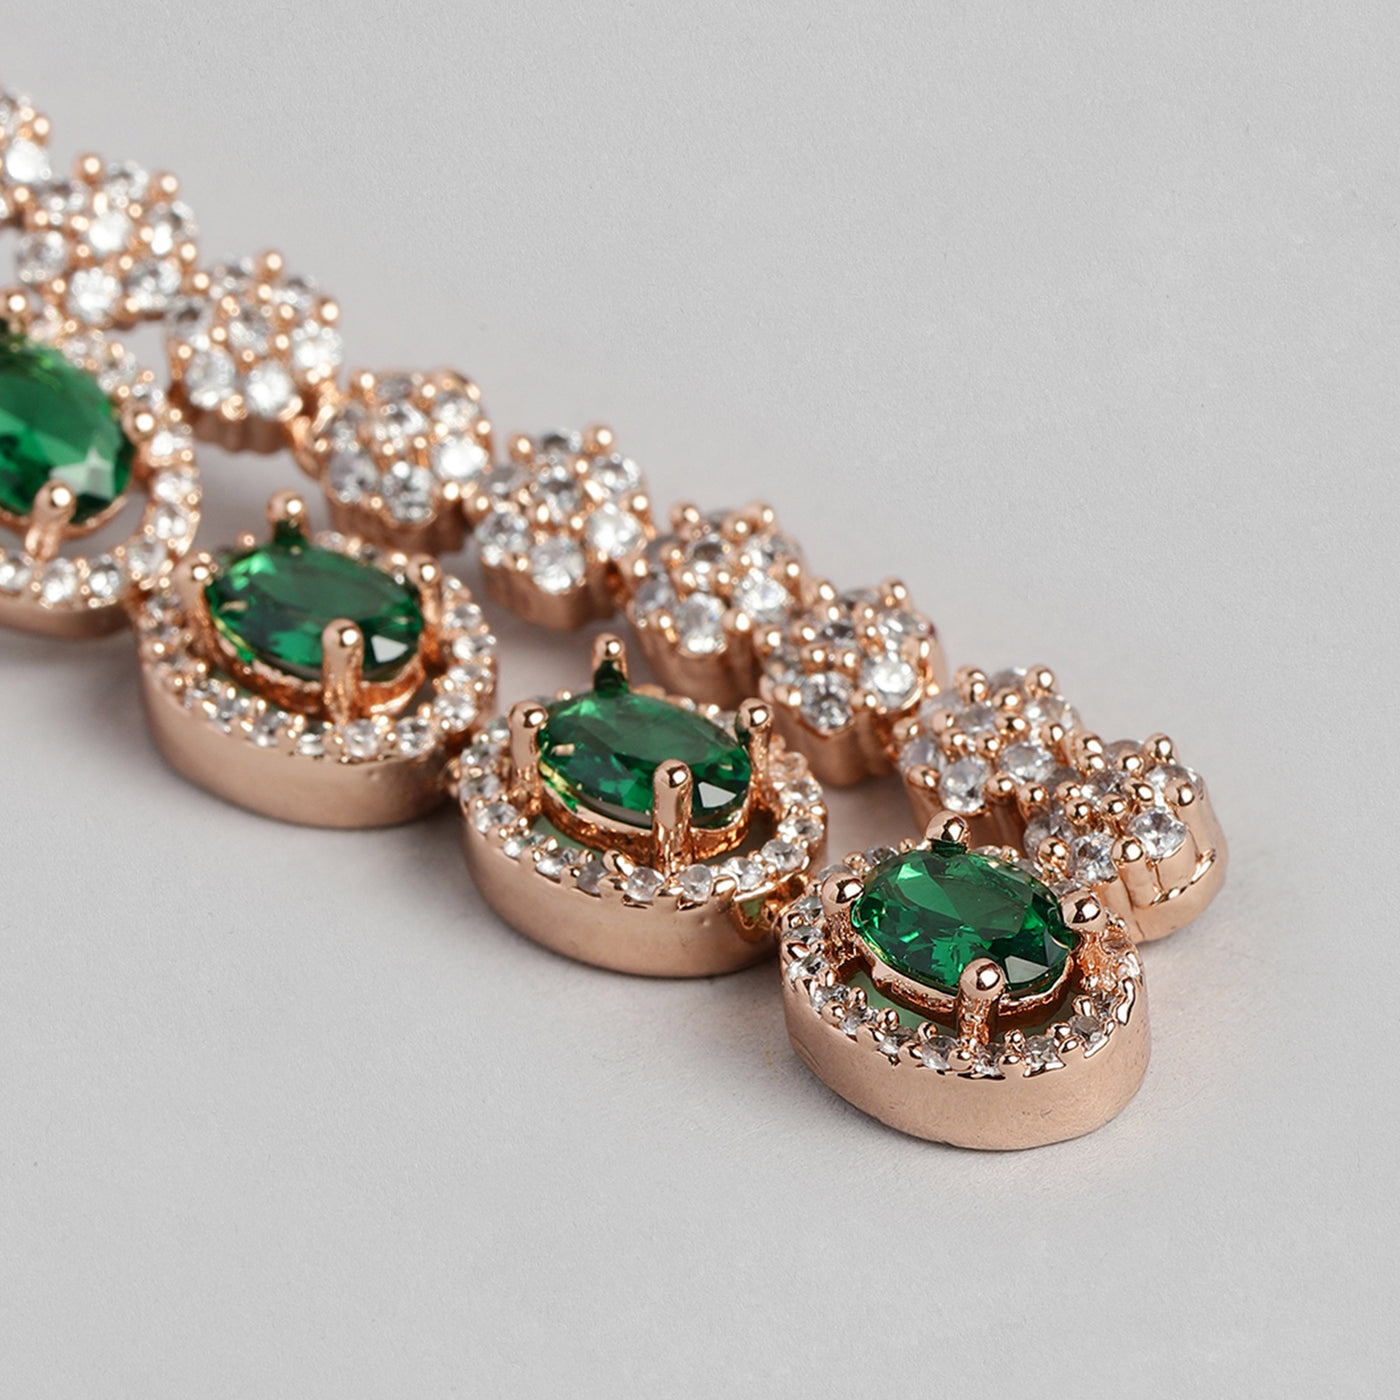 Estele Rose Gold Plated CZ Scintillating Necklace Set with Emerald & White Stones for Girls/Women